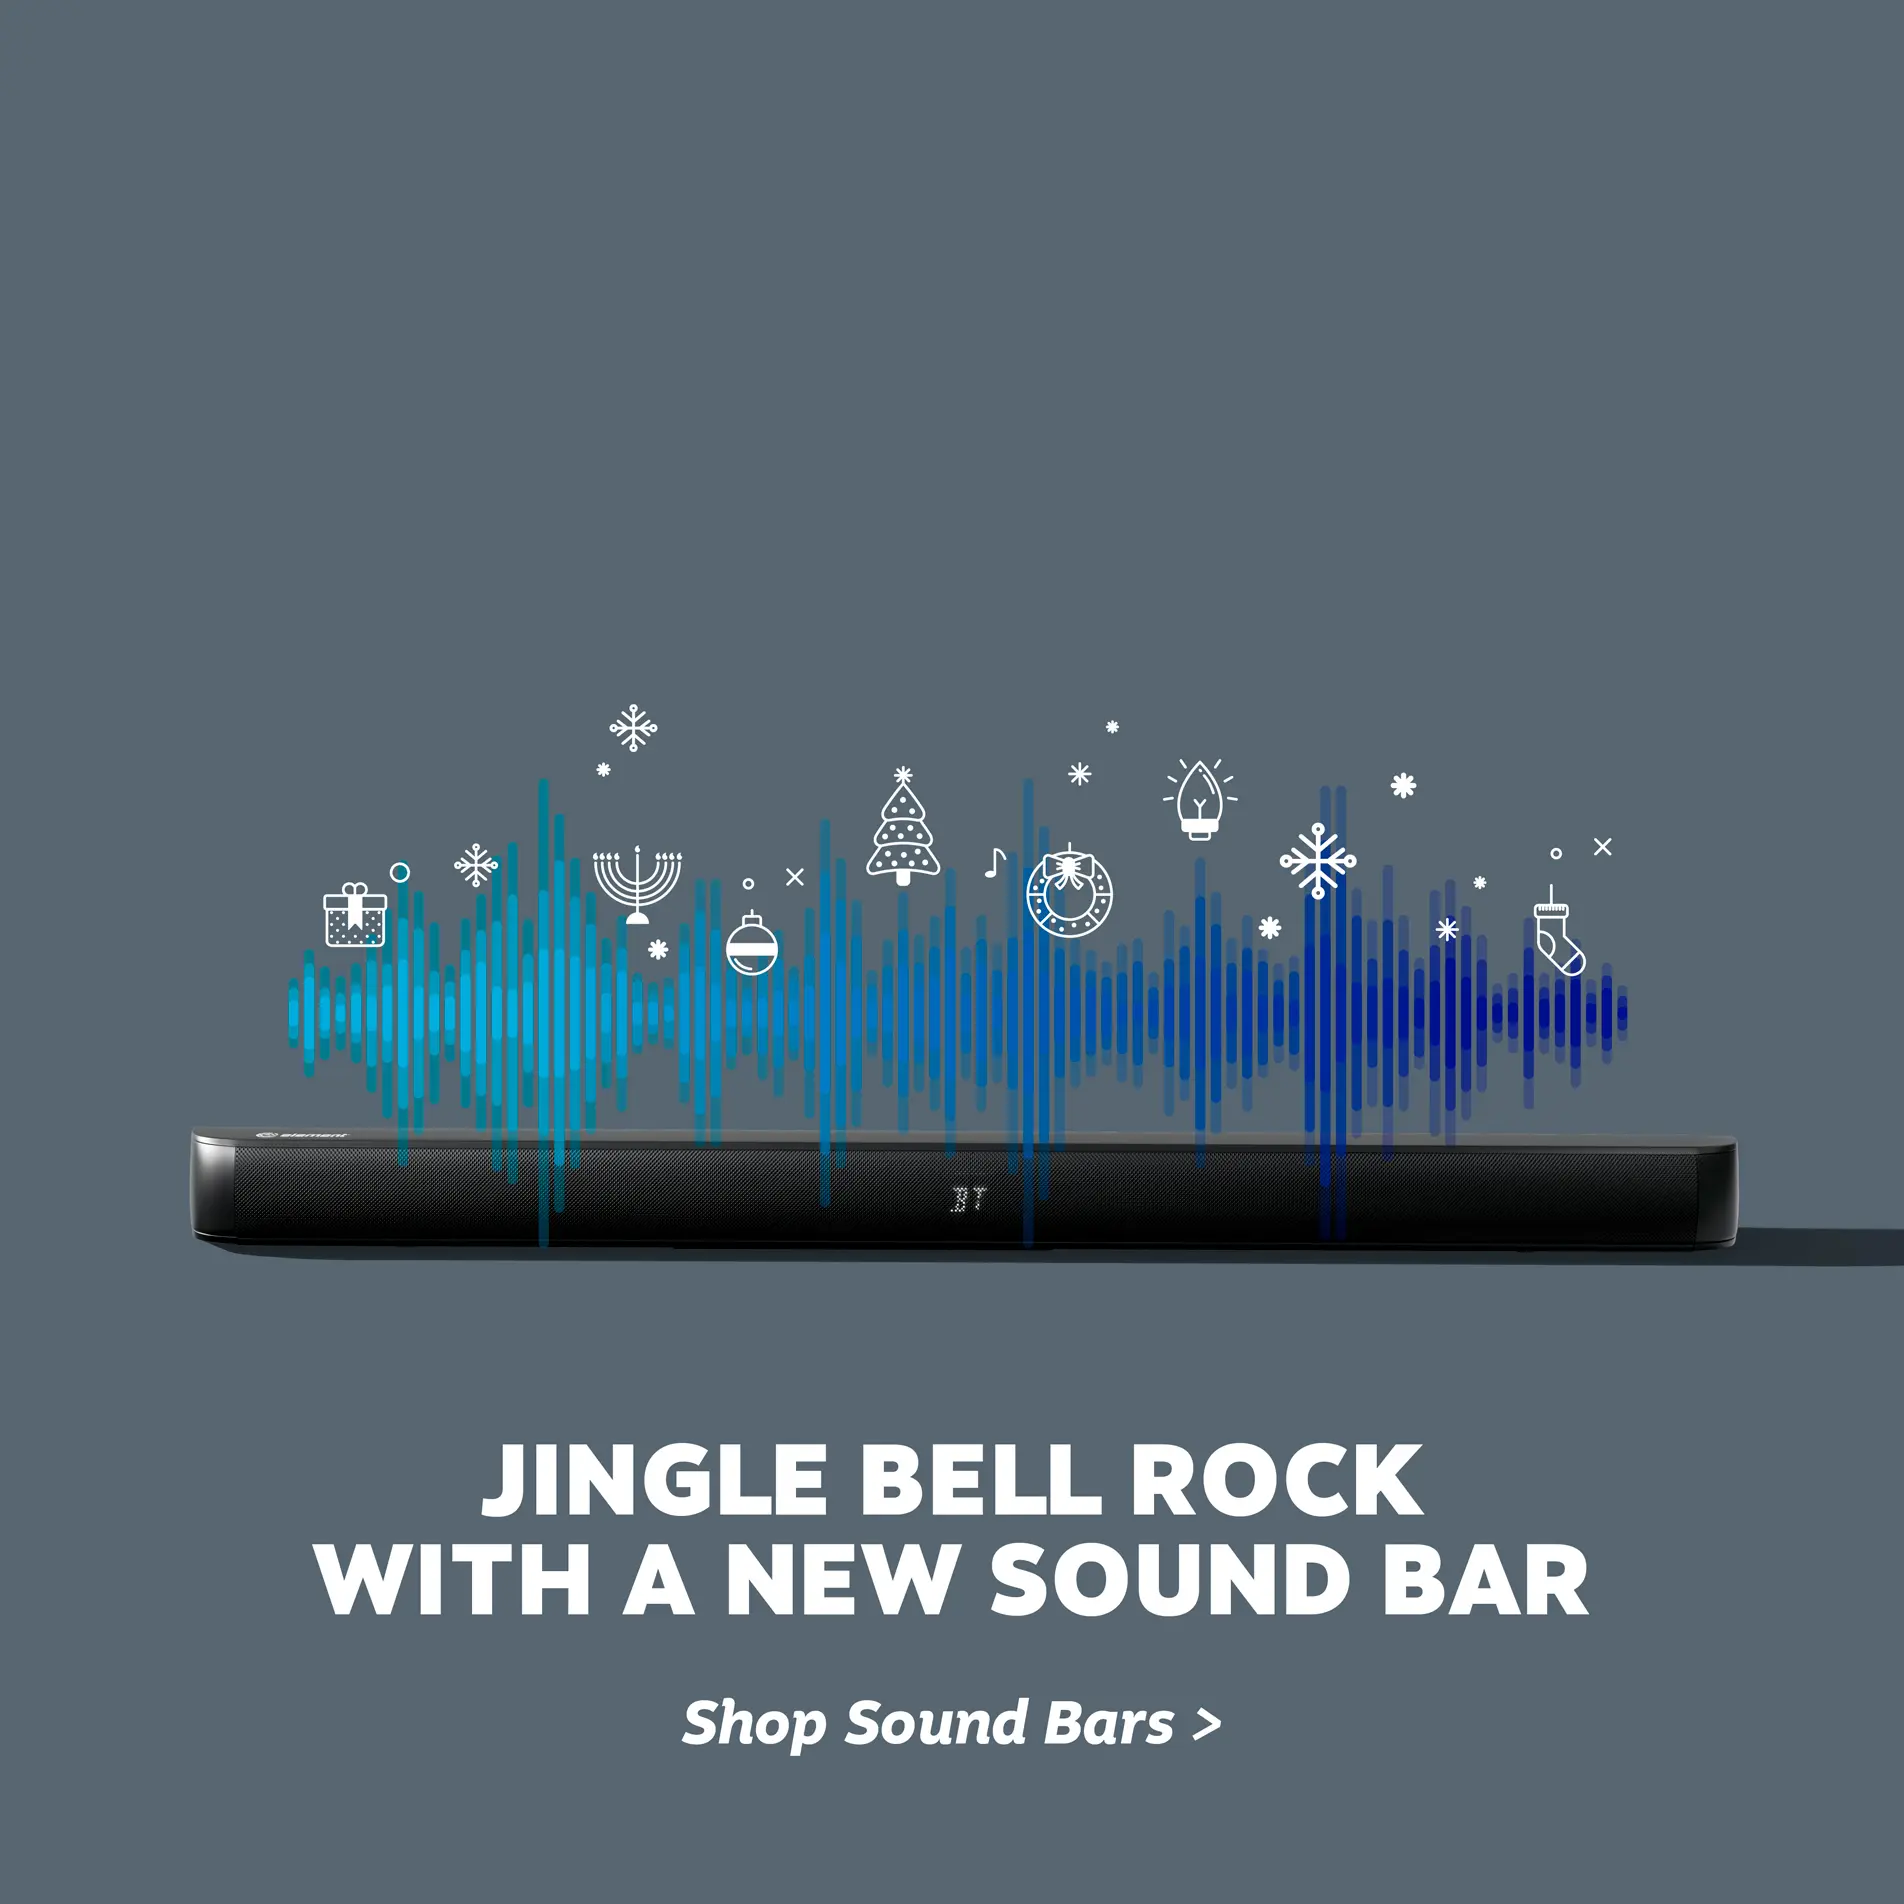 Jingle bell rock with a new sound bar